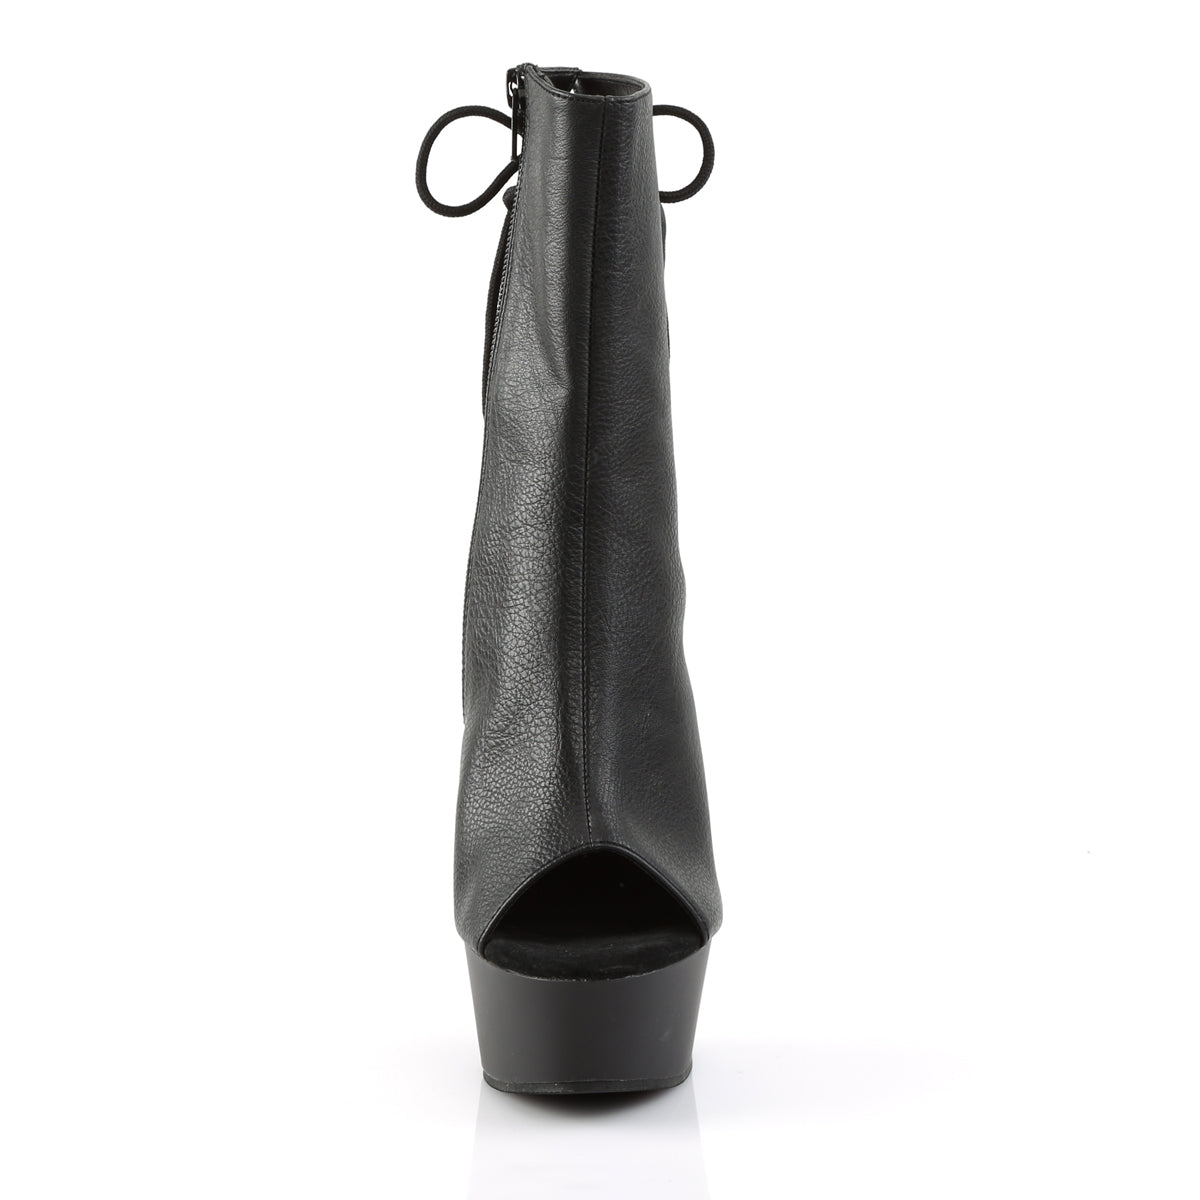 DELIGHT-1018 Black Faux Leather/Black Ankle Boot Pleaser